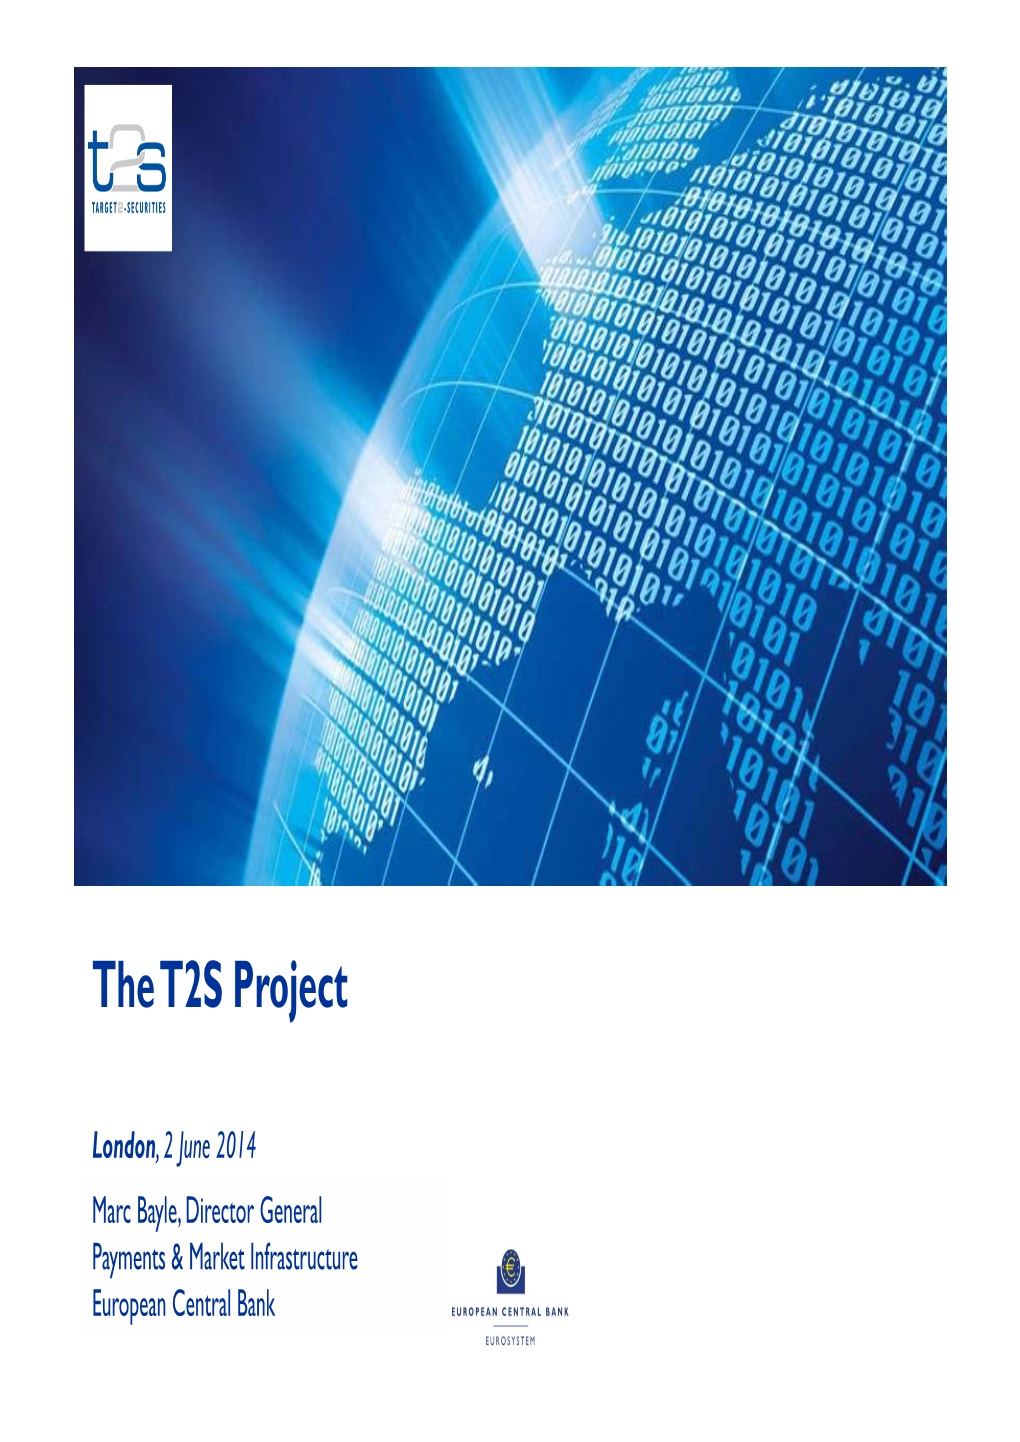 The T2S Project